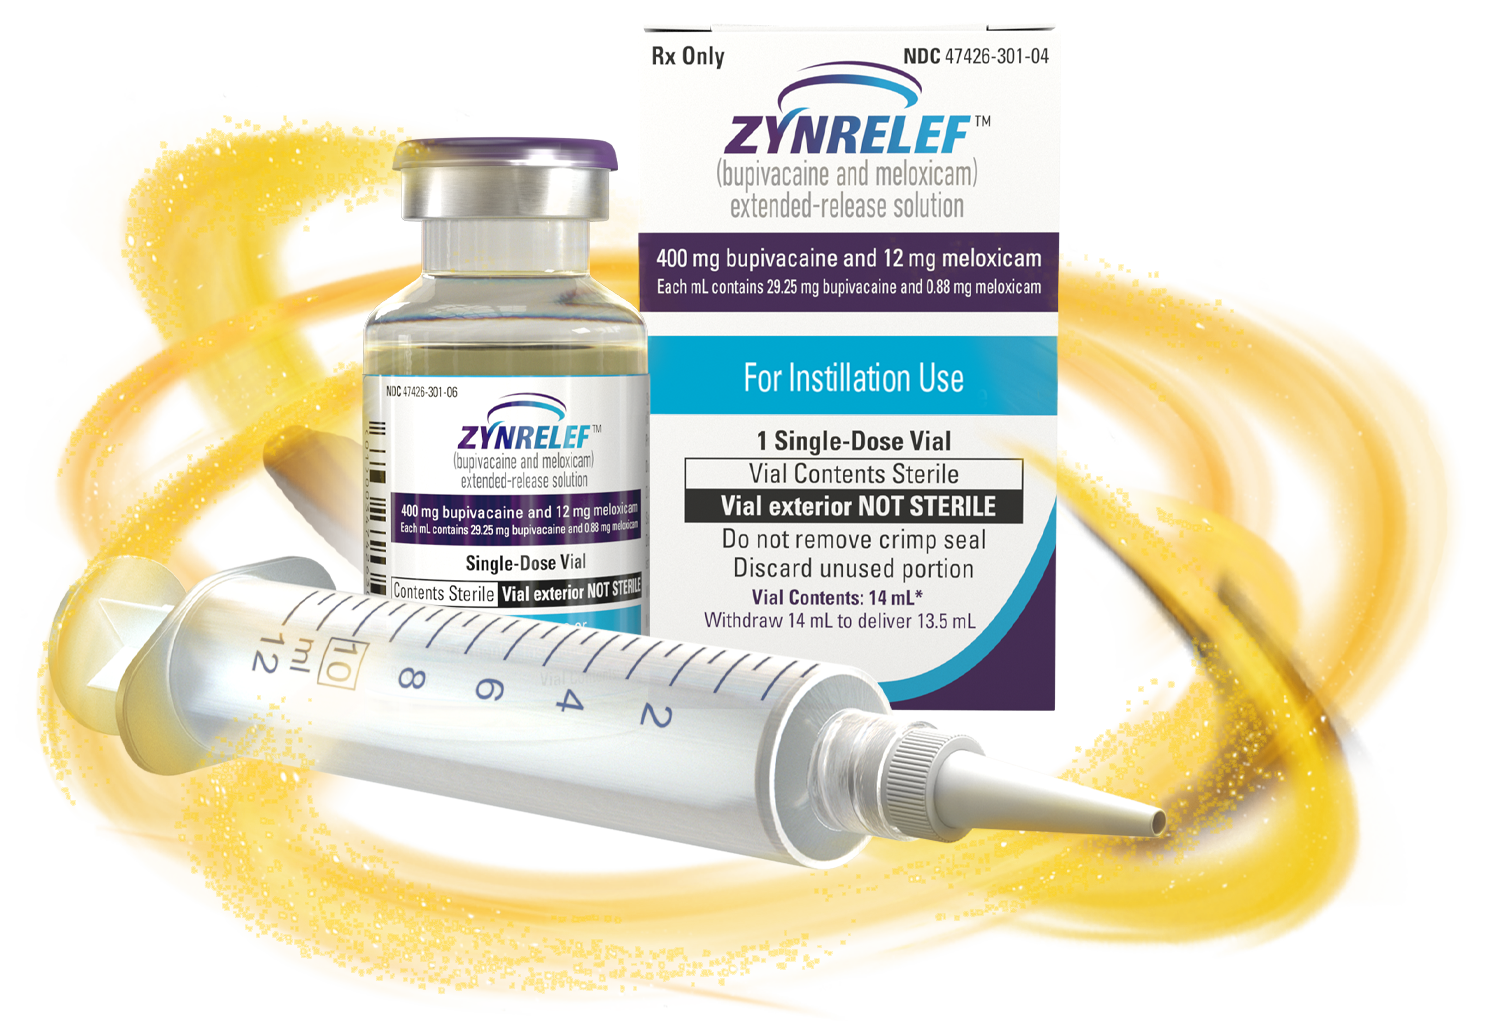 ZYNRELEF box with 400 mg vial next to it; needle-free applicator laying in front of vial and box; all components.